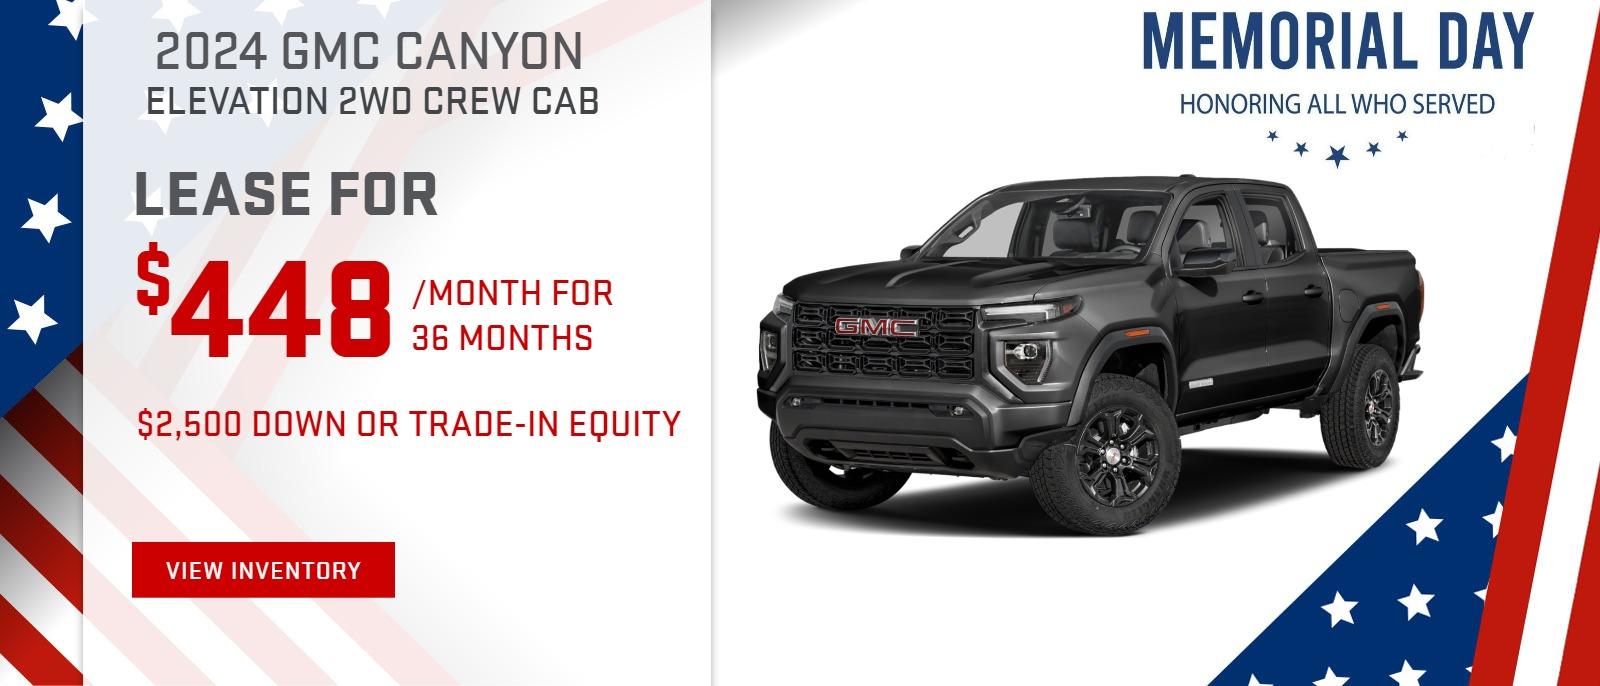 LEASE A 2024 CANYON ELEVATION 2WD CREW CAB TRUCK FOR $448 PER MONTH FOR 36 MONTHS FROM MIKE YOUNG BUICK GMC IN FRANKENMUTH, MI